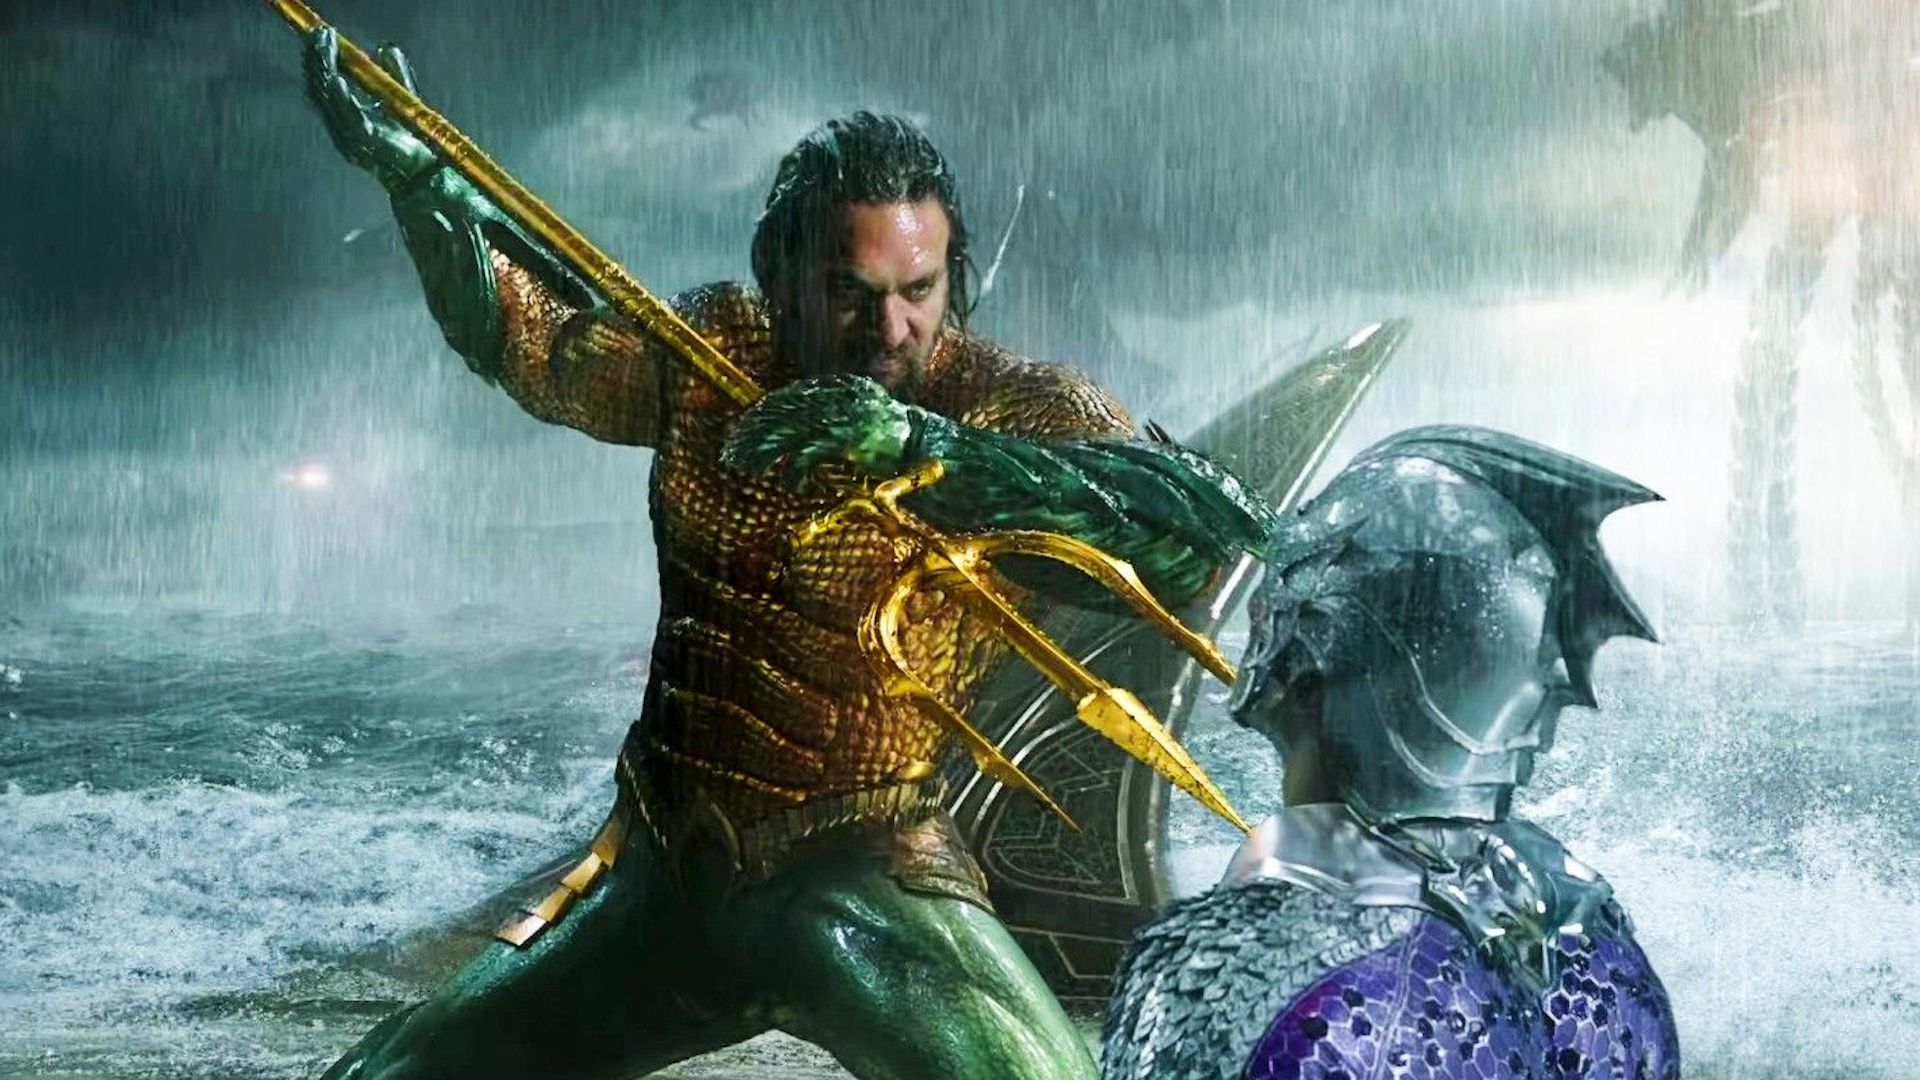 Aquaman 2 title revealed by James Wan: Aquaman and the Lost Kingdom